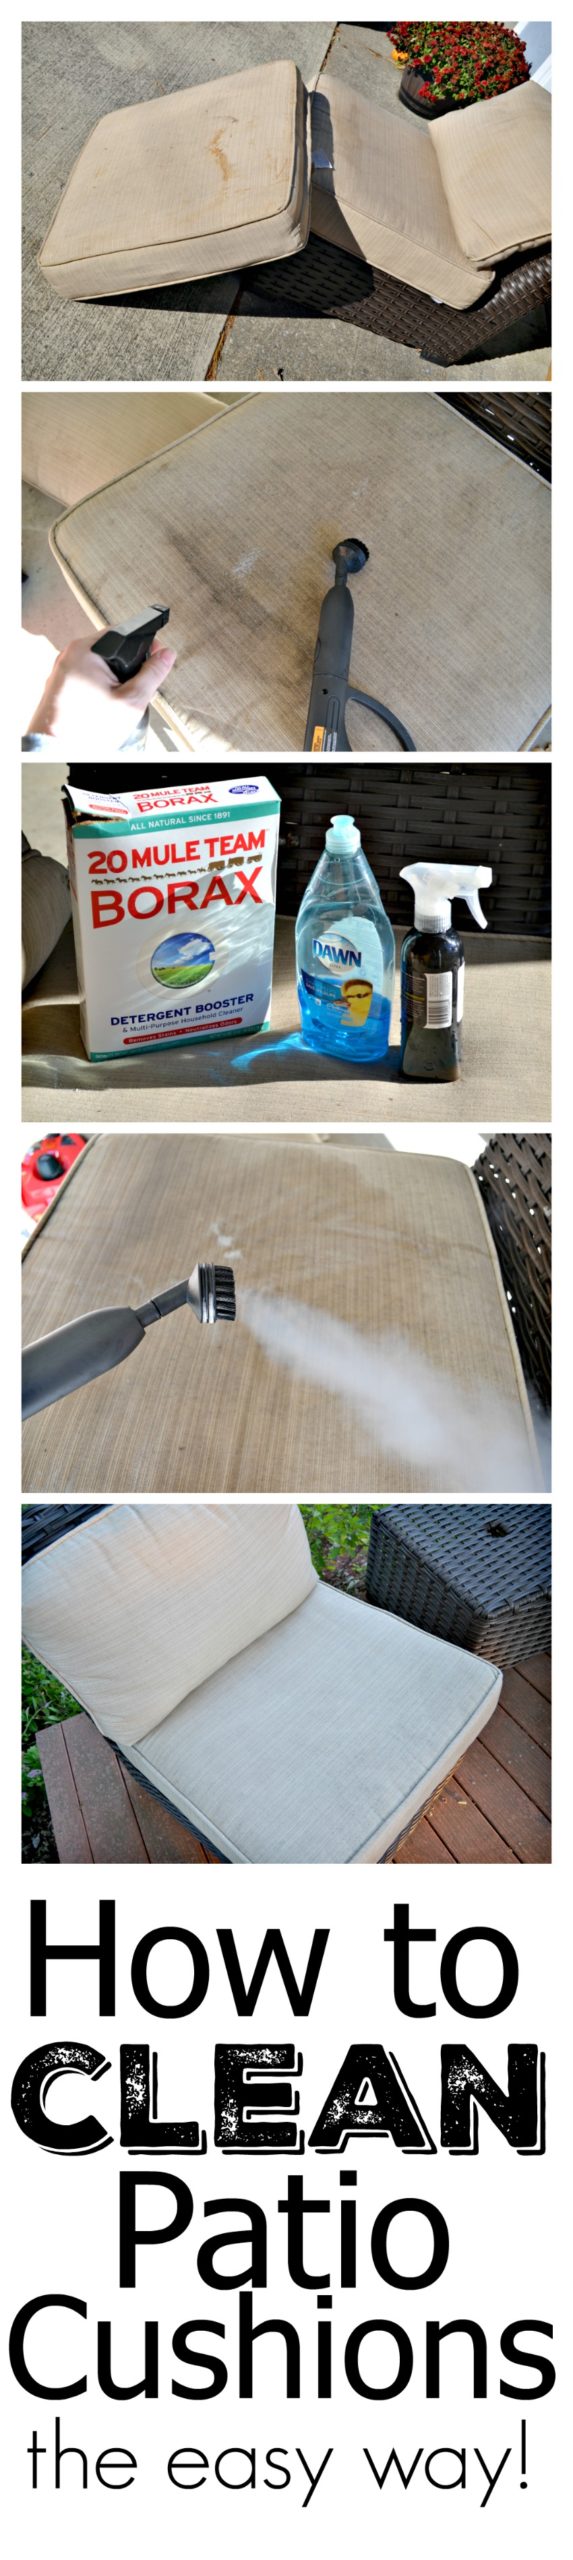 How-to-Clean-Patio-Cushions-the-EASY-Way-from-The-Cards-We-Drew